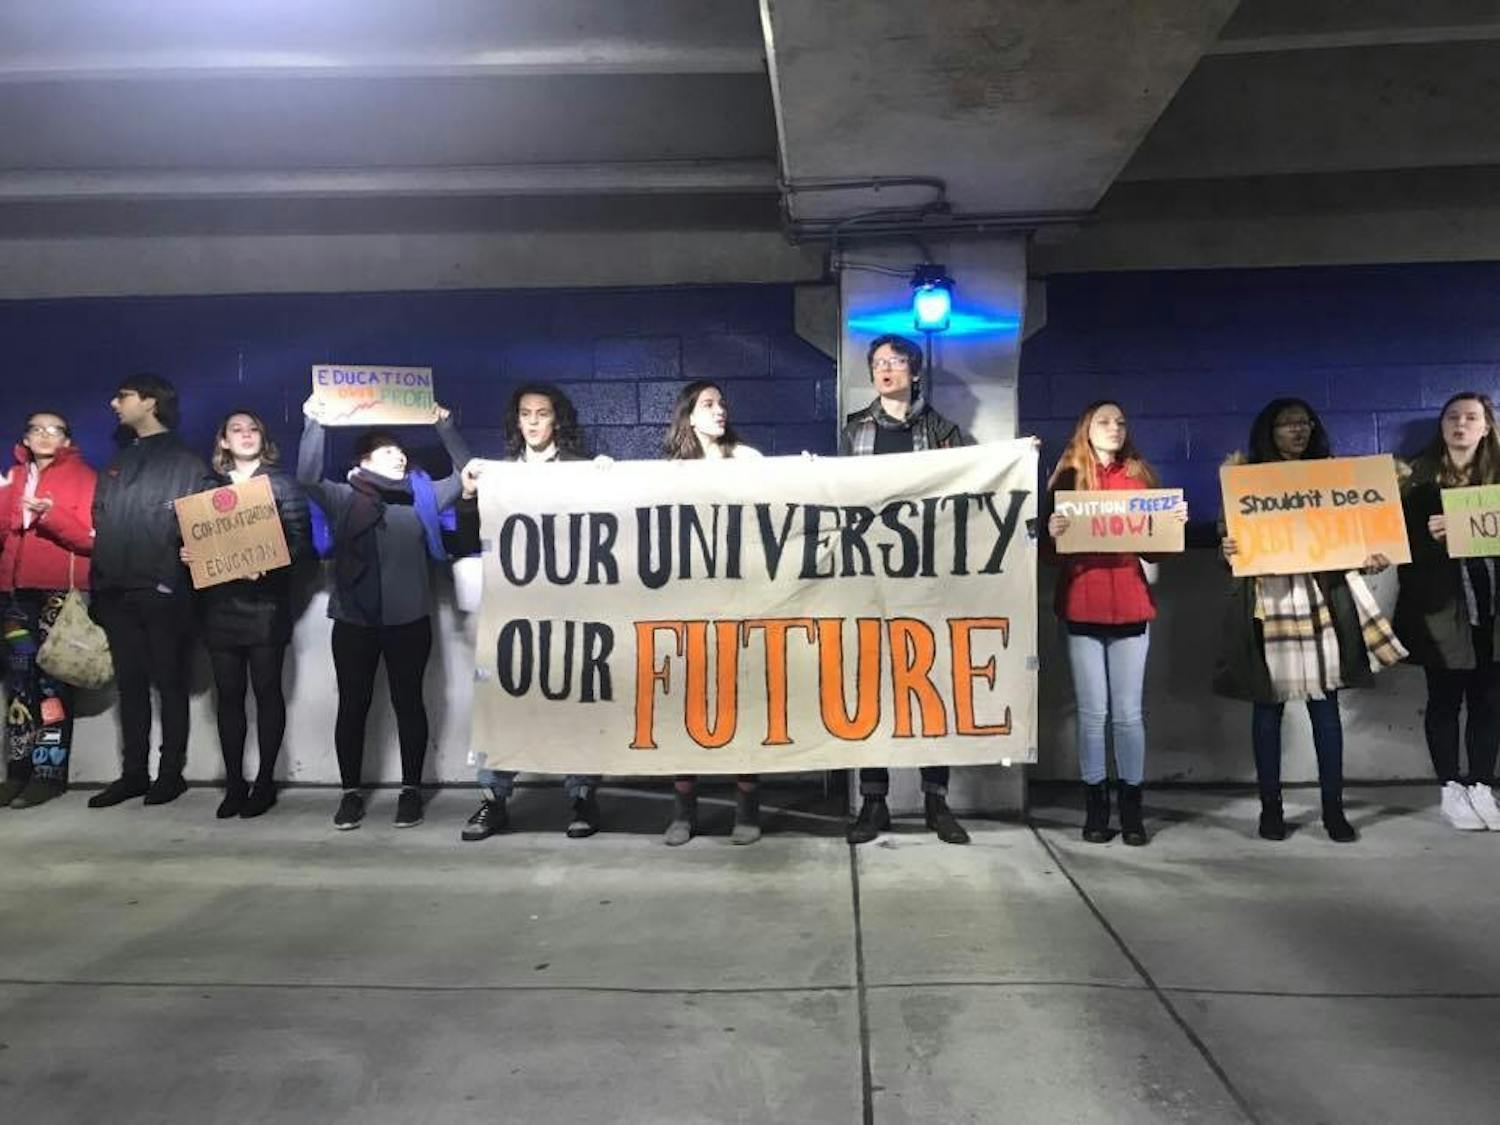 Students protested an anticipated tuition increase ahead of the Board of Trustees meeting in March 2017.&nbsp;